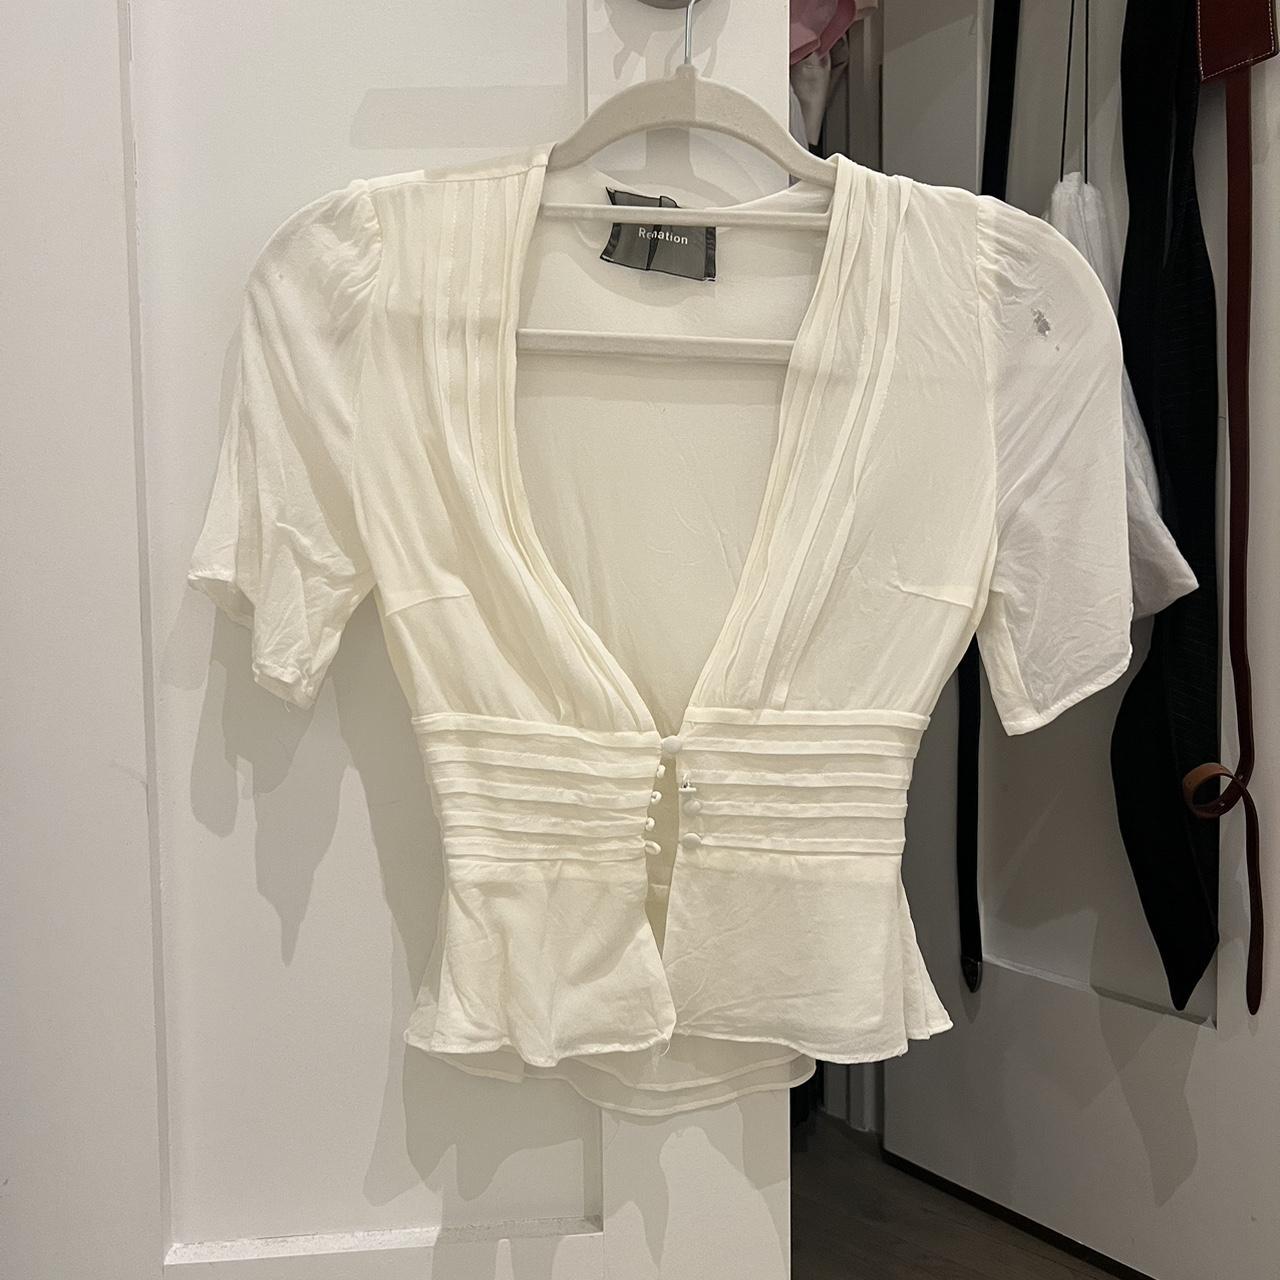 Reformation Women's White and Cream Blouse | Depop